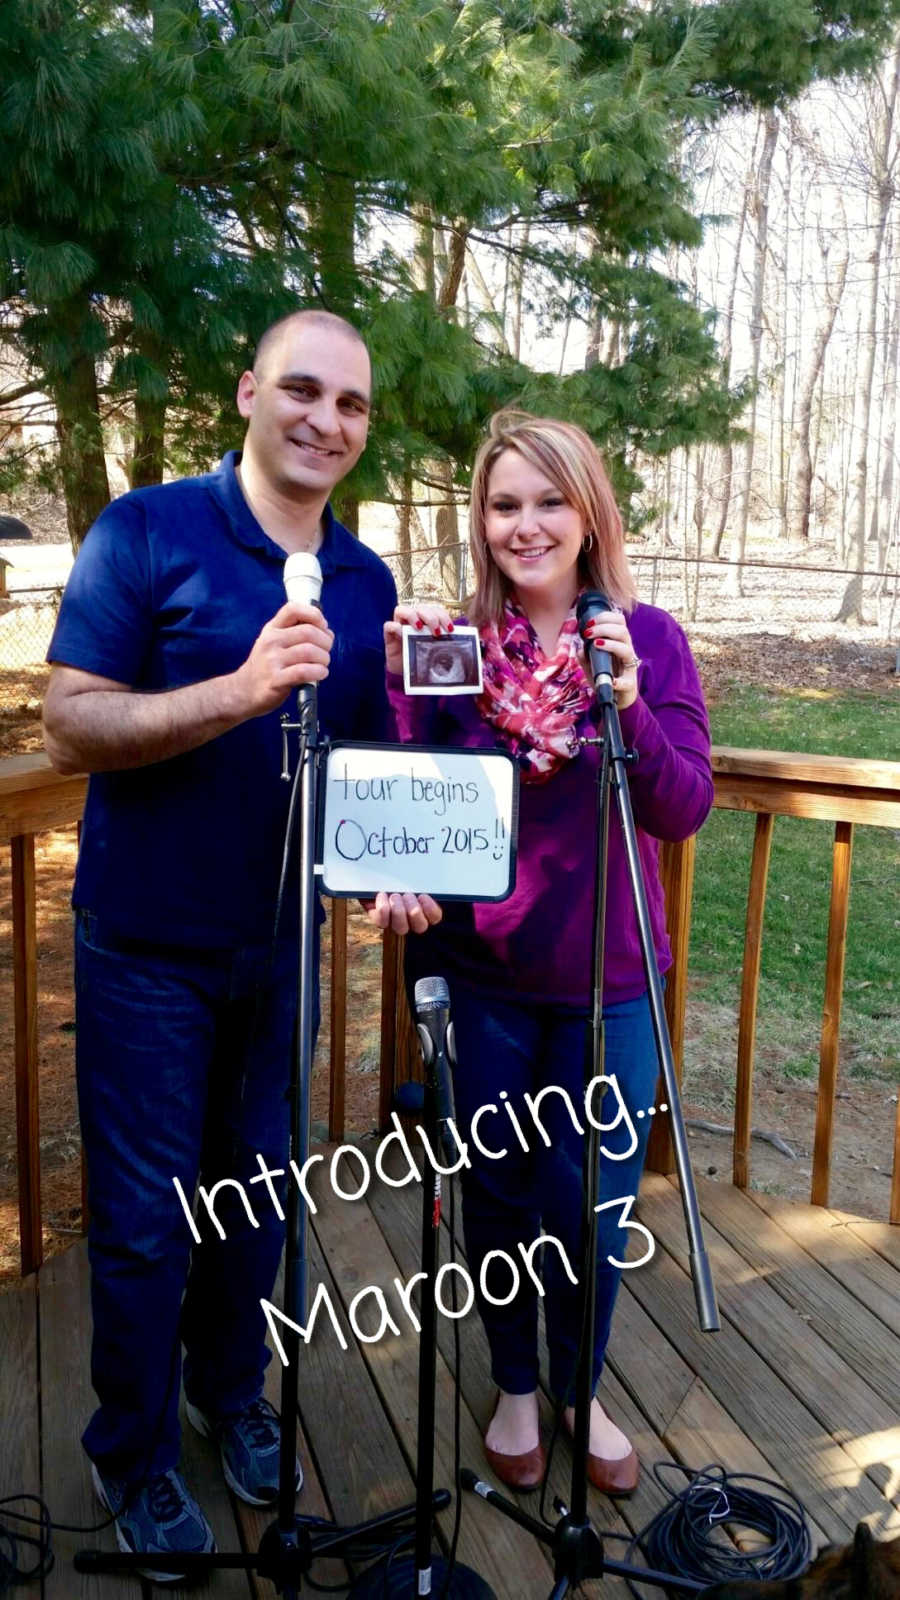 Husband and wife standing holding ultrasound in front of microphones holding sign saying, "tour begins October 2015"